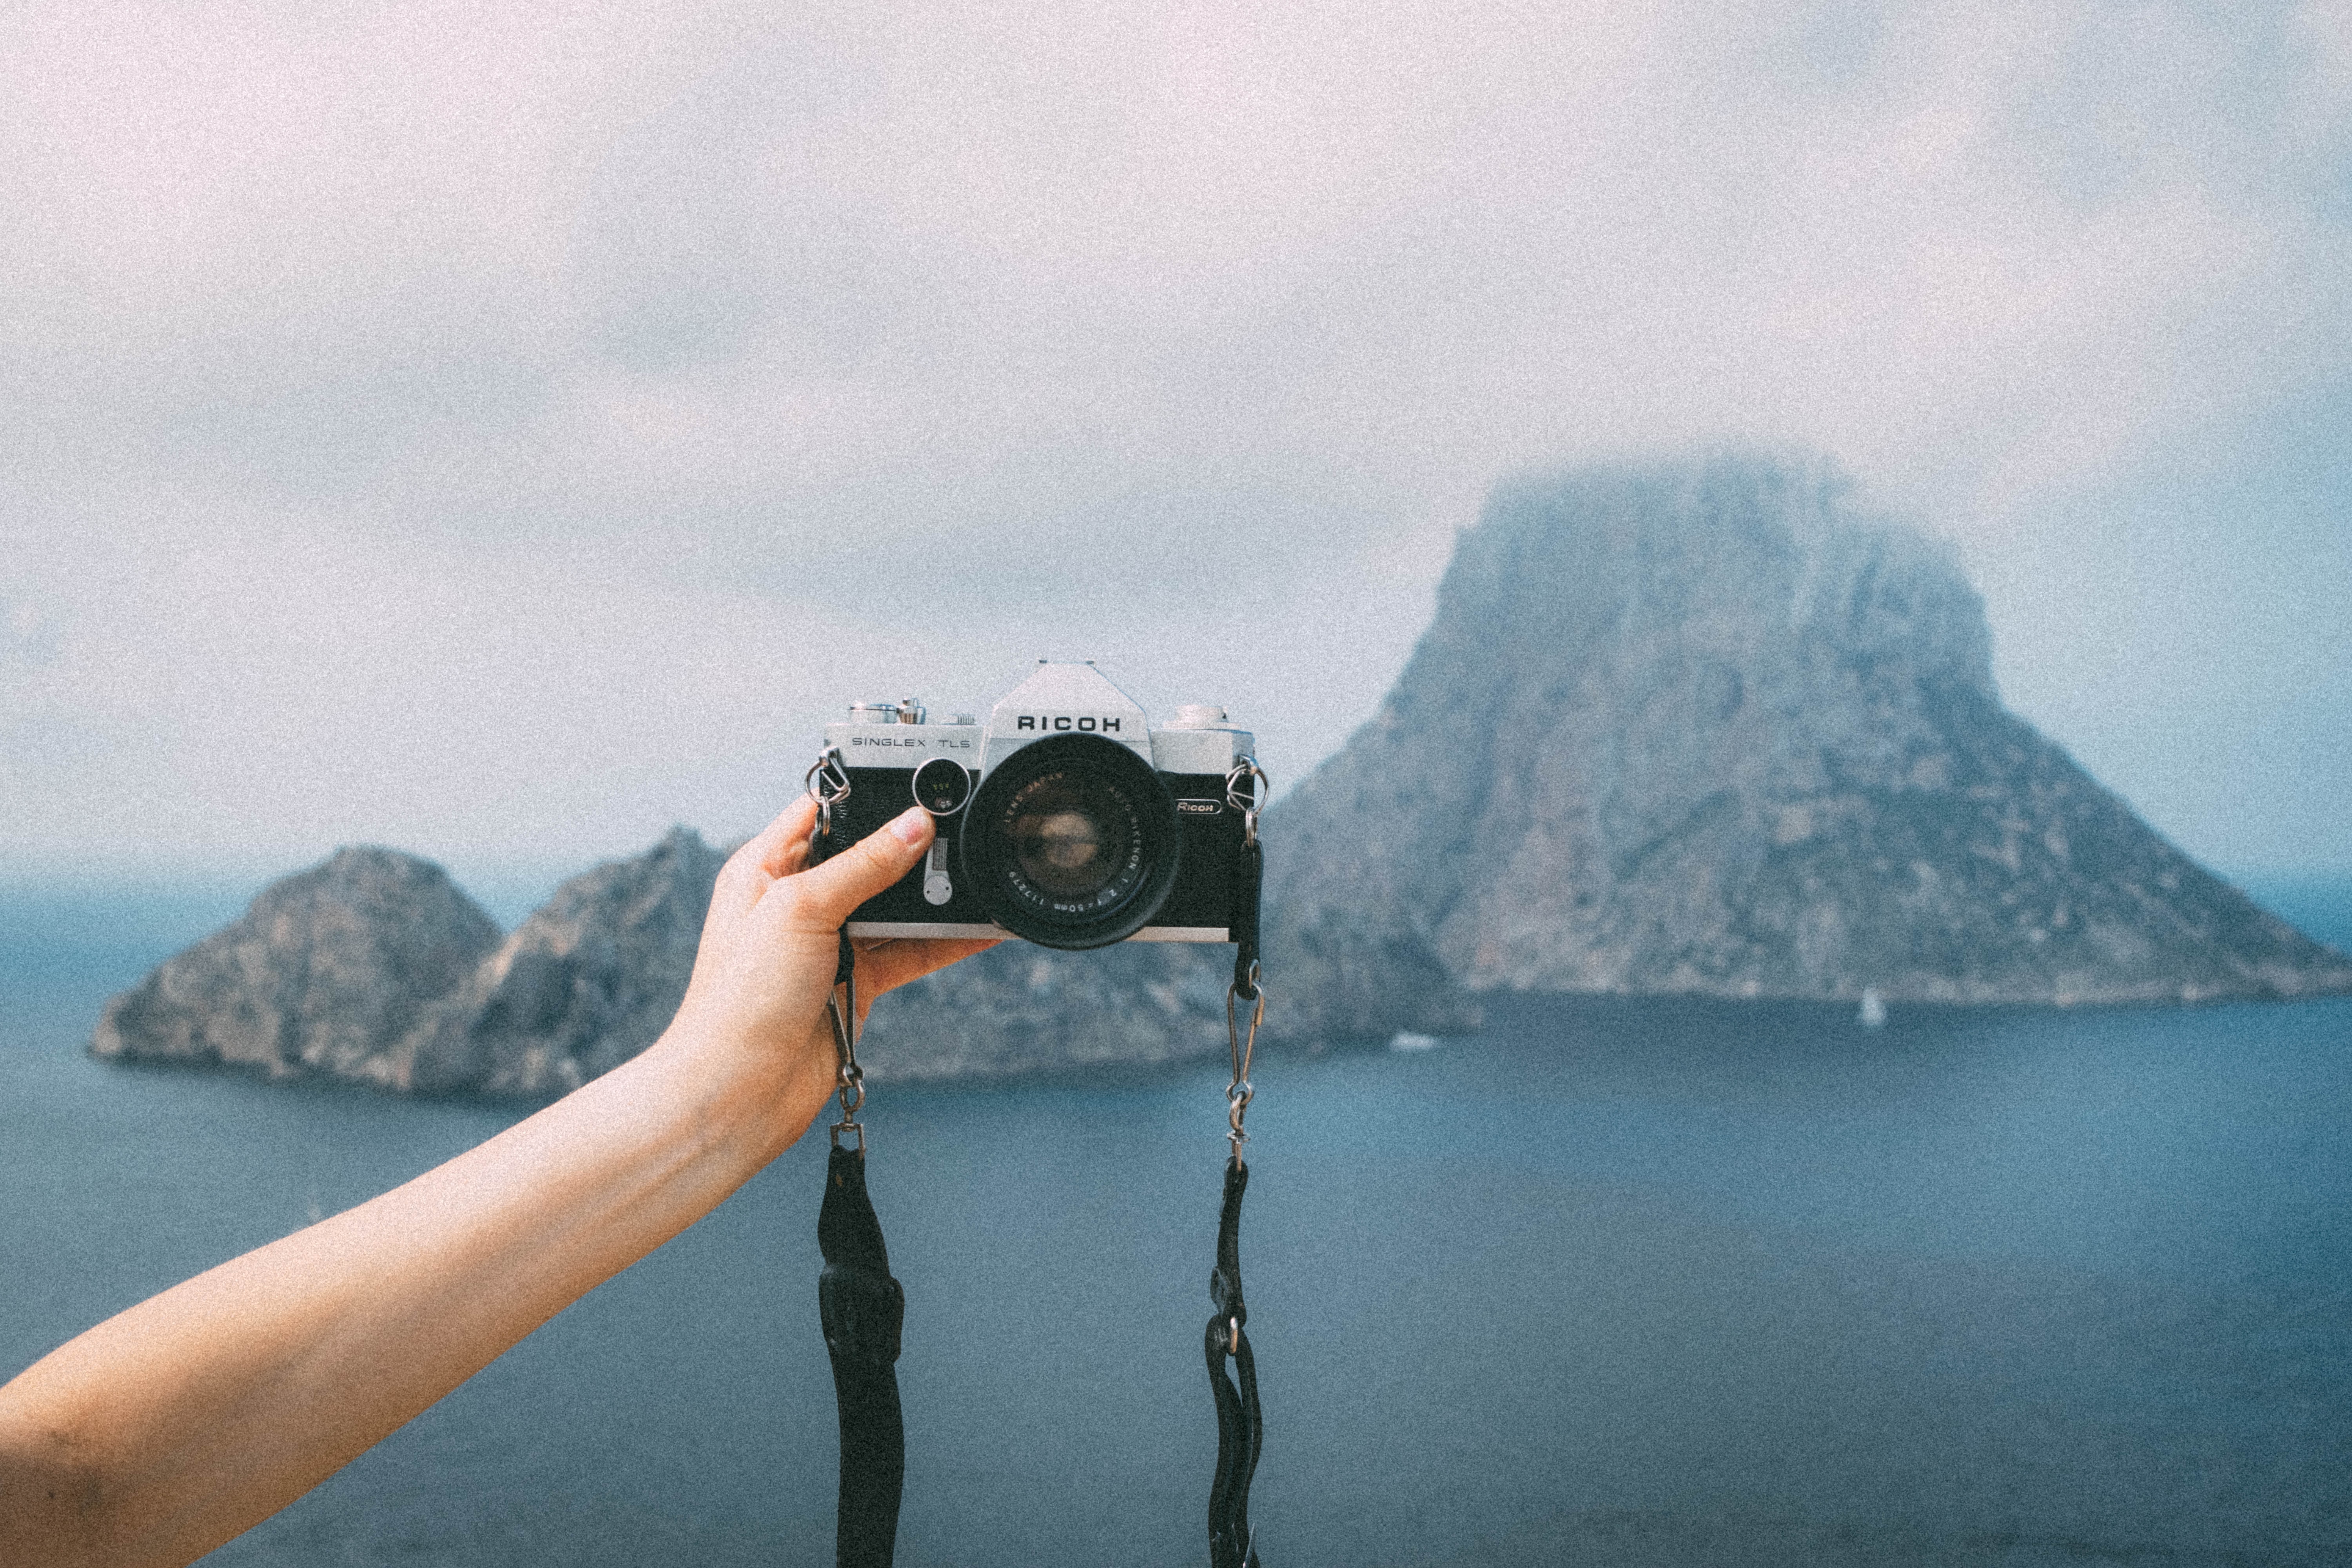 You don't have to be terrible to be an influencer. (Photo by Esmee Holdijk on Unsplash)